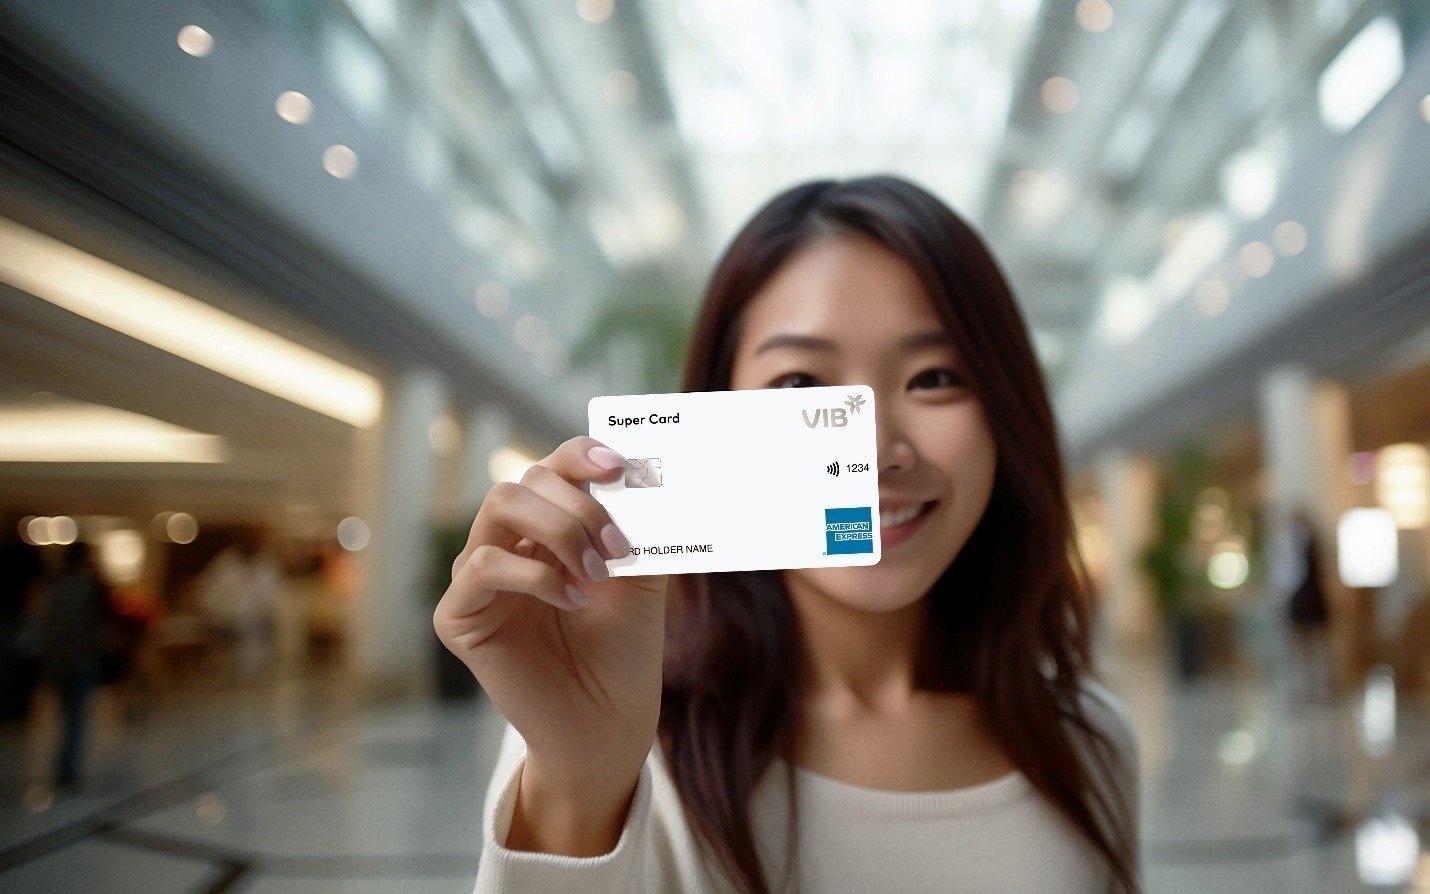 The first line of credit cards in the market that allows users to choose their features